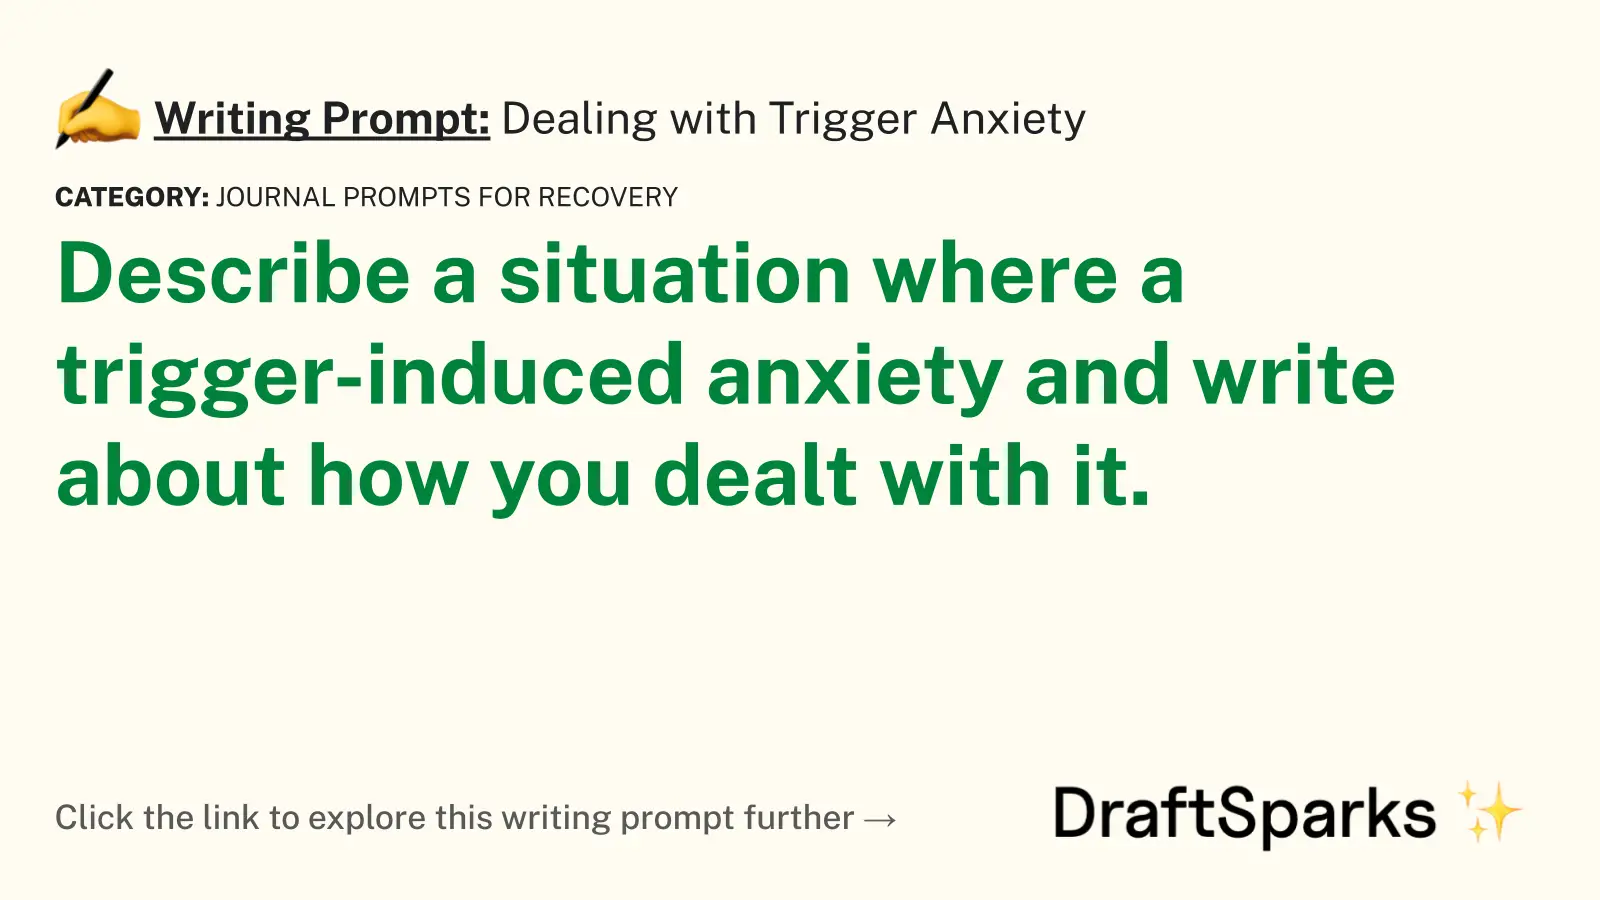 Dealing with Trigger Anxiety